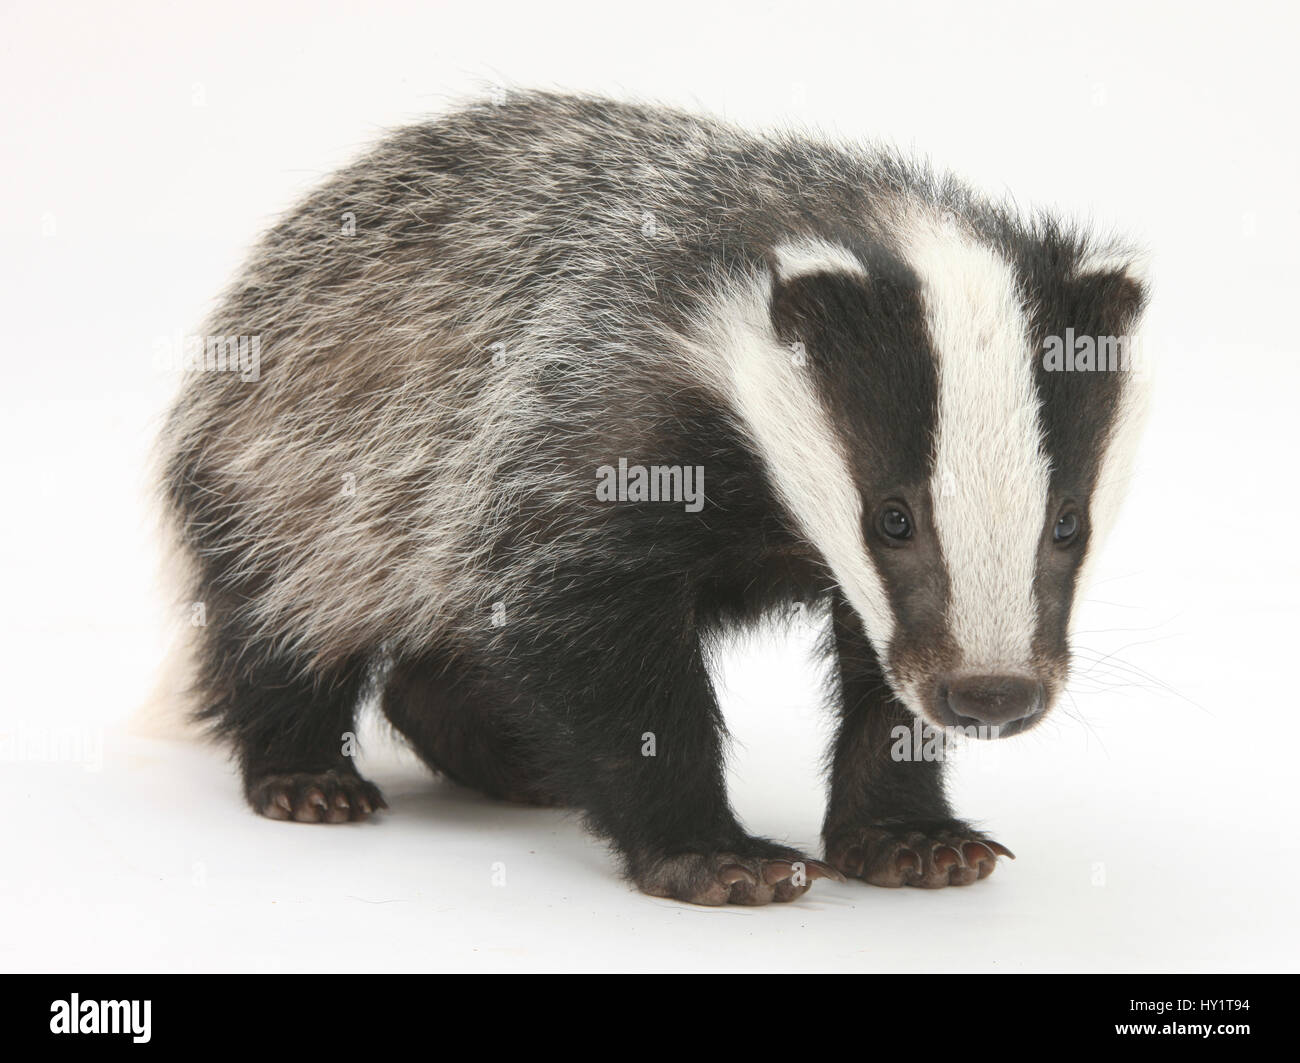 Portrait of a young Badger (Meles meles). Stock Photo